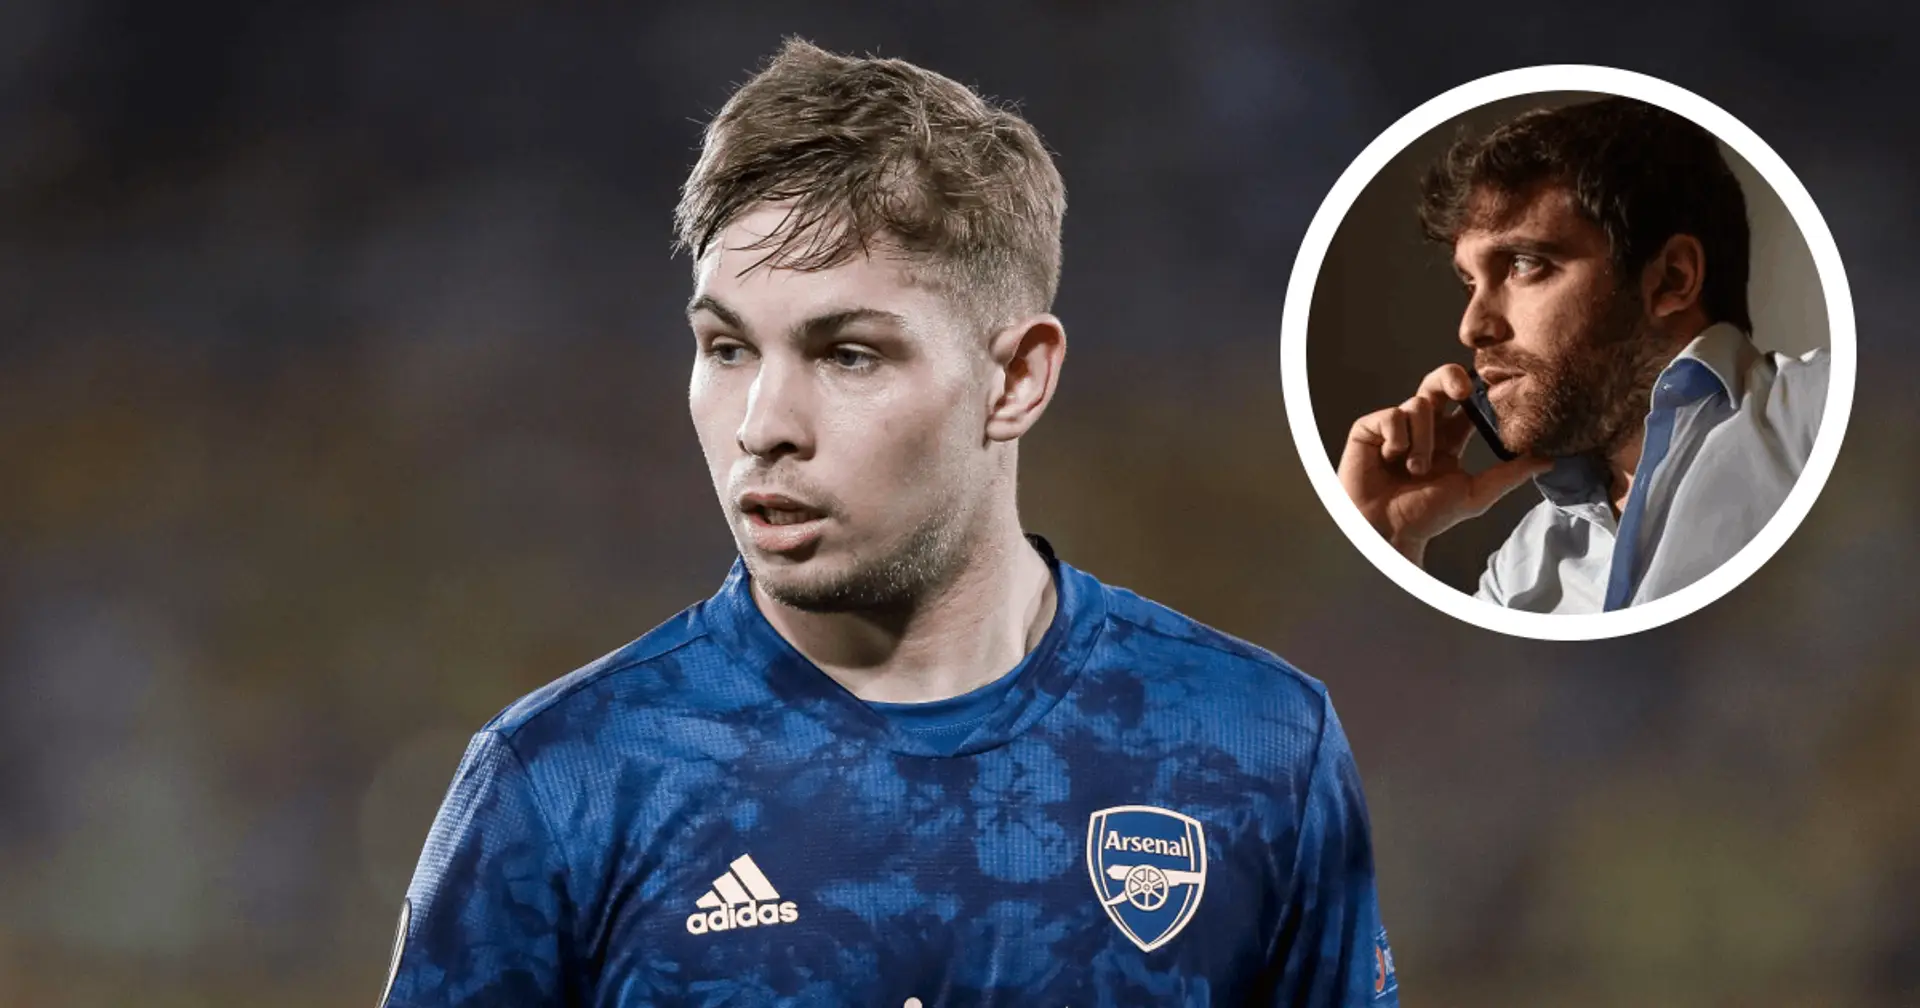 Fabrizio Romano provides crucial update on Arsenal's contract talks with Emile Smith Rowe